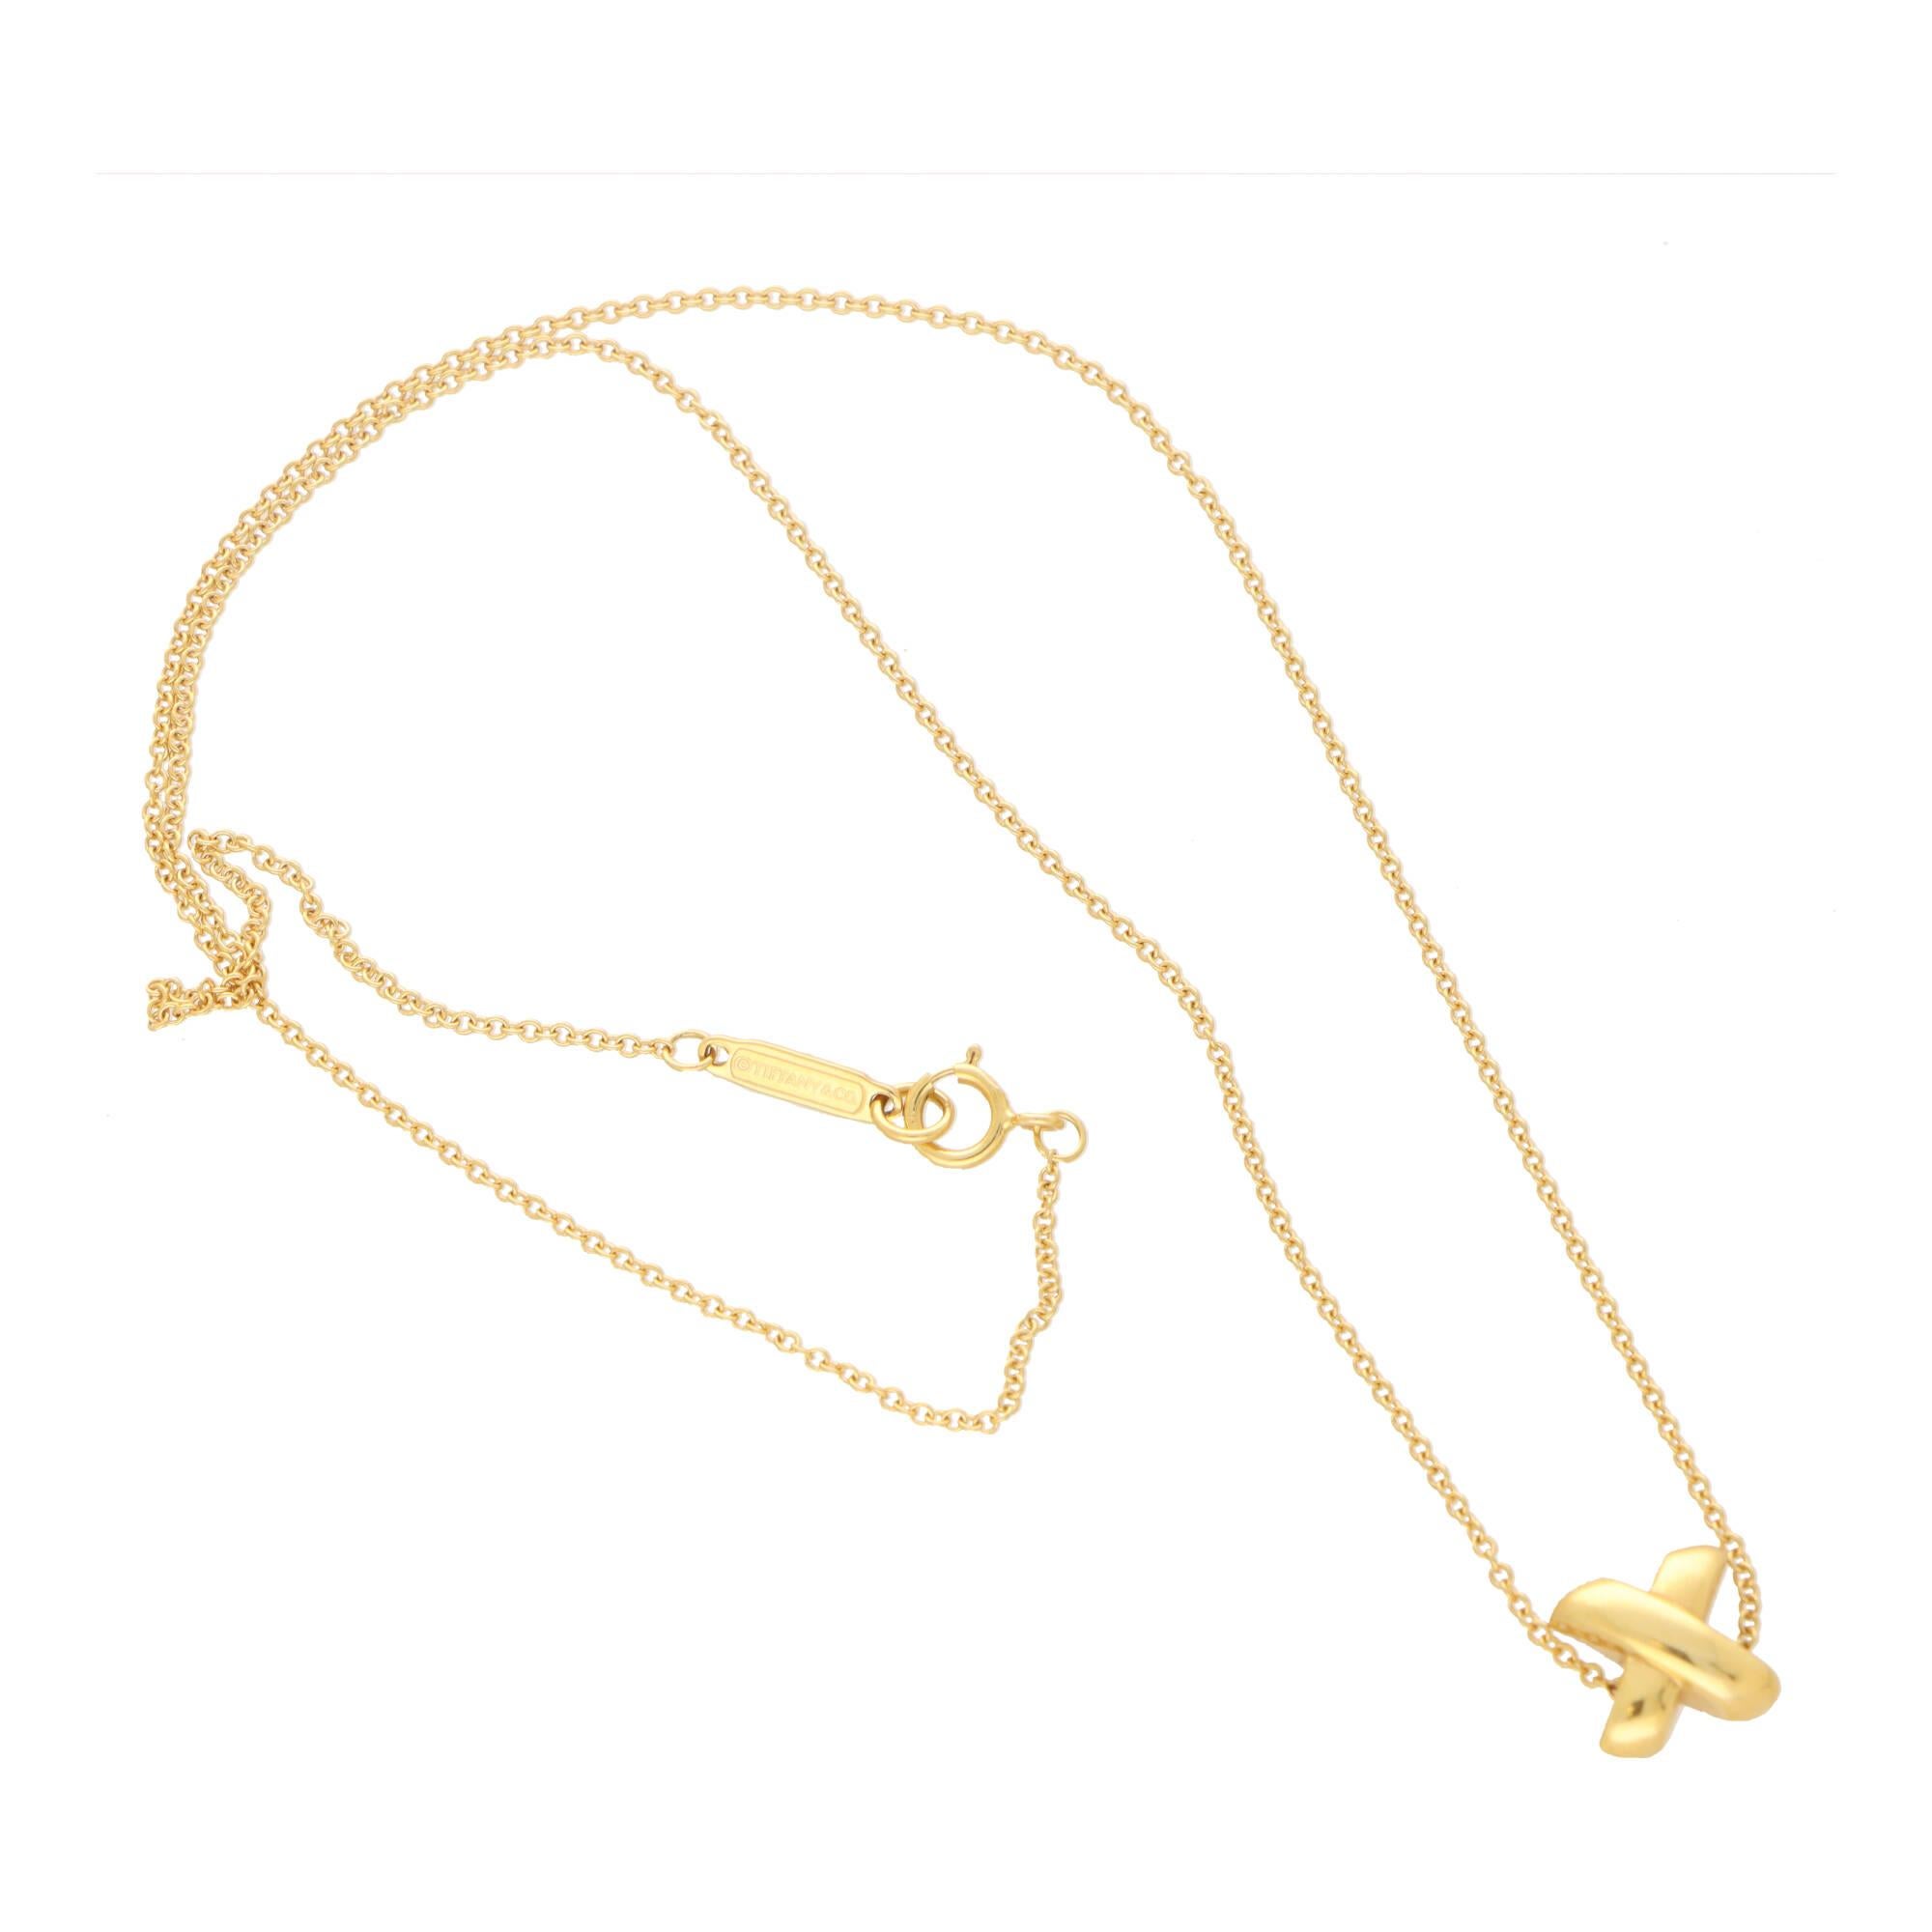 A beautiful vintage Tiffany & Co. ‘Cross Stitch’ pendant necklace set in 18k yellow gold.

The necklace is solely set with a cross stitch motif which hangs freely from a 16-inch Tiffany gold chain. The chain is secured with a clasp fitting.

Due to